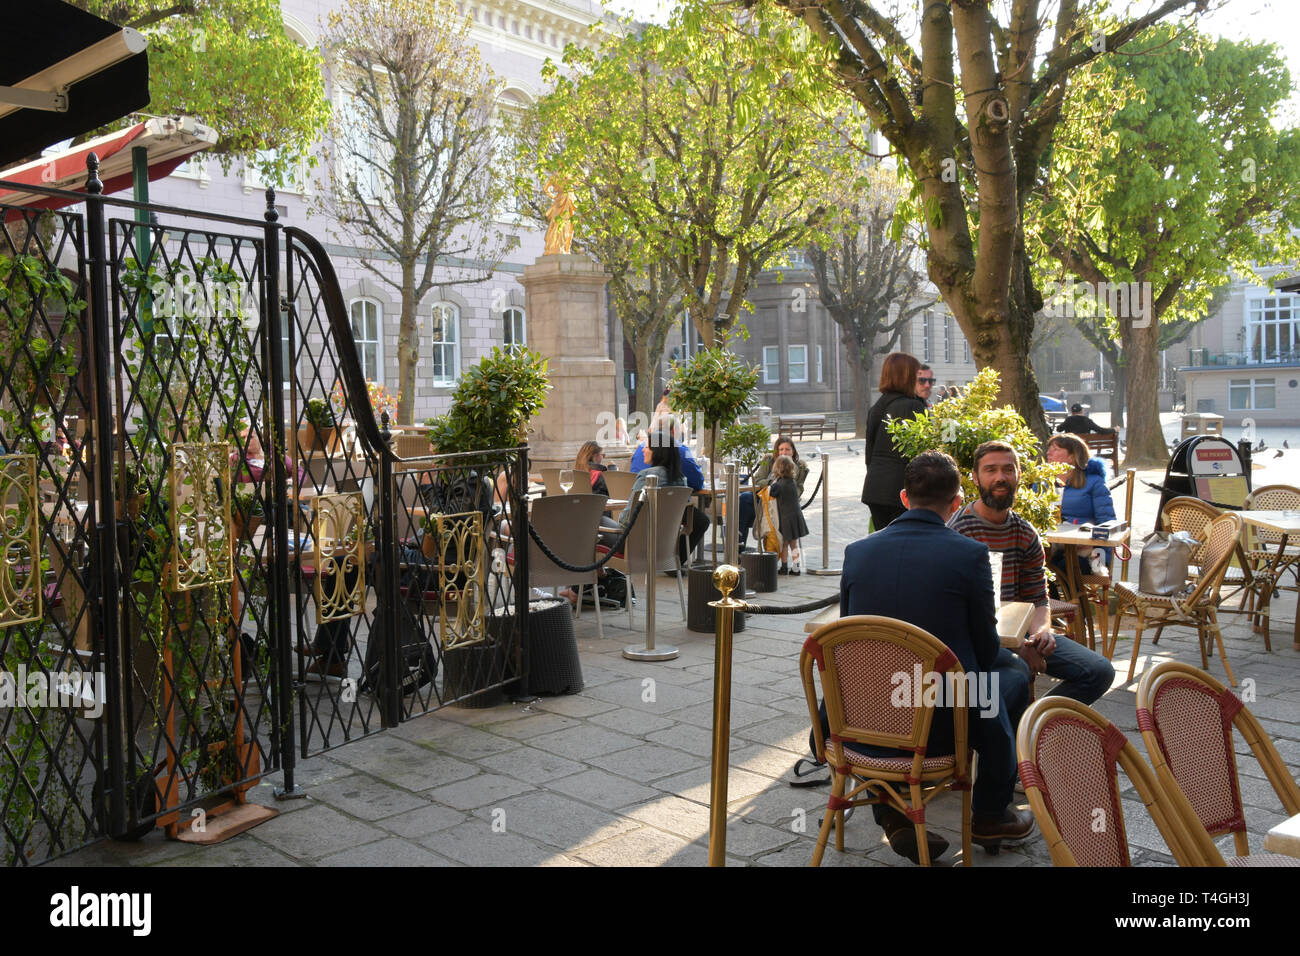 Spring sunshine enjoyed by visitors in the Royal Square, St Helier,Jersey, Channel islands Stock Photo